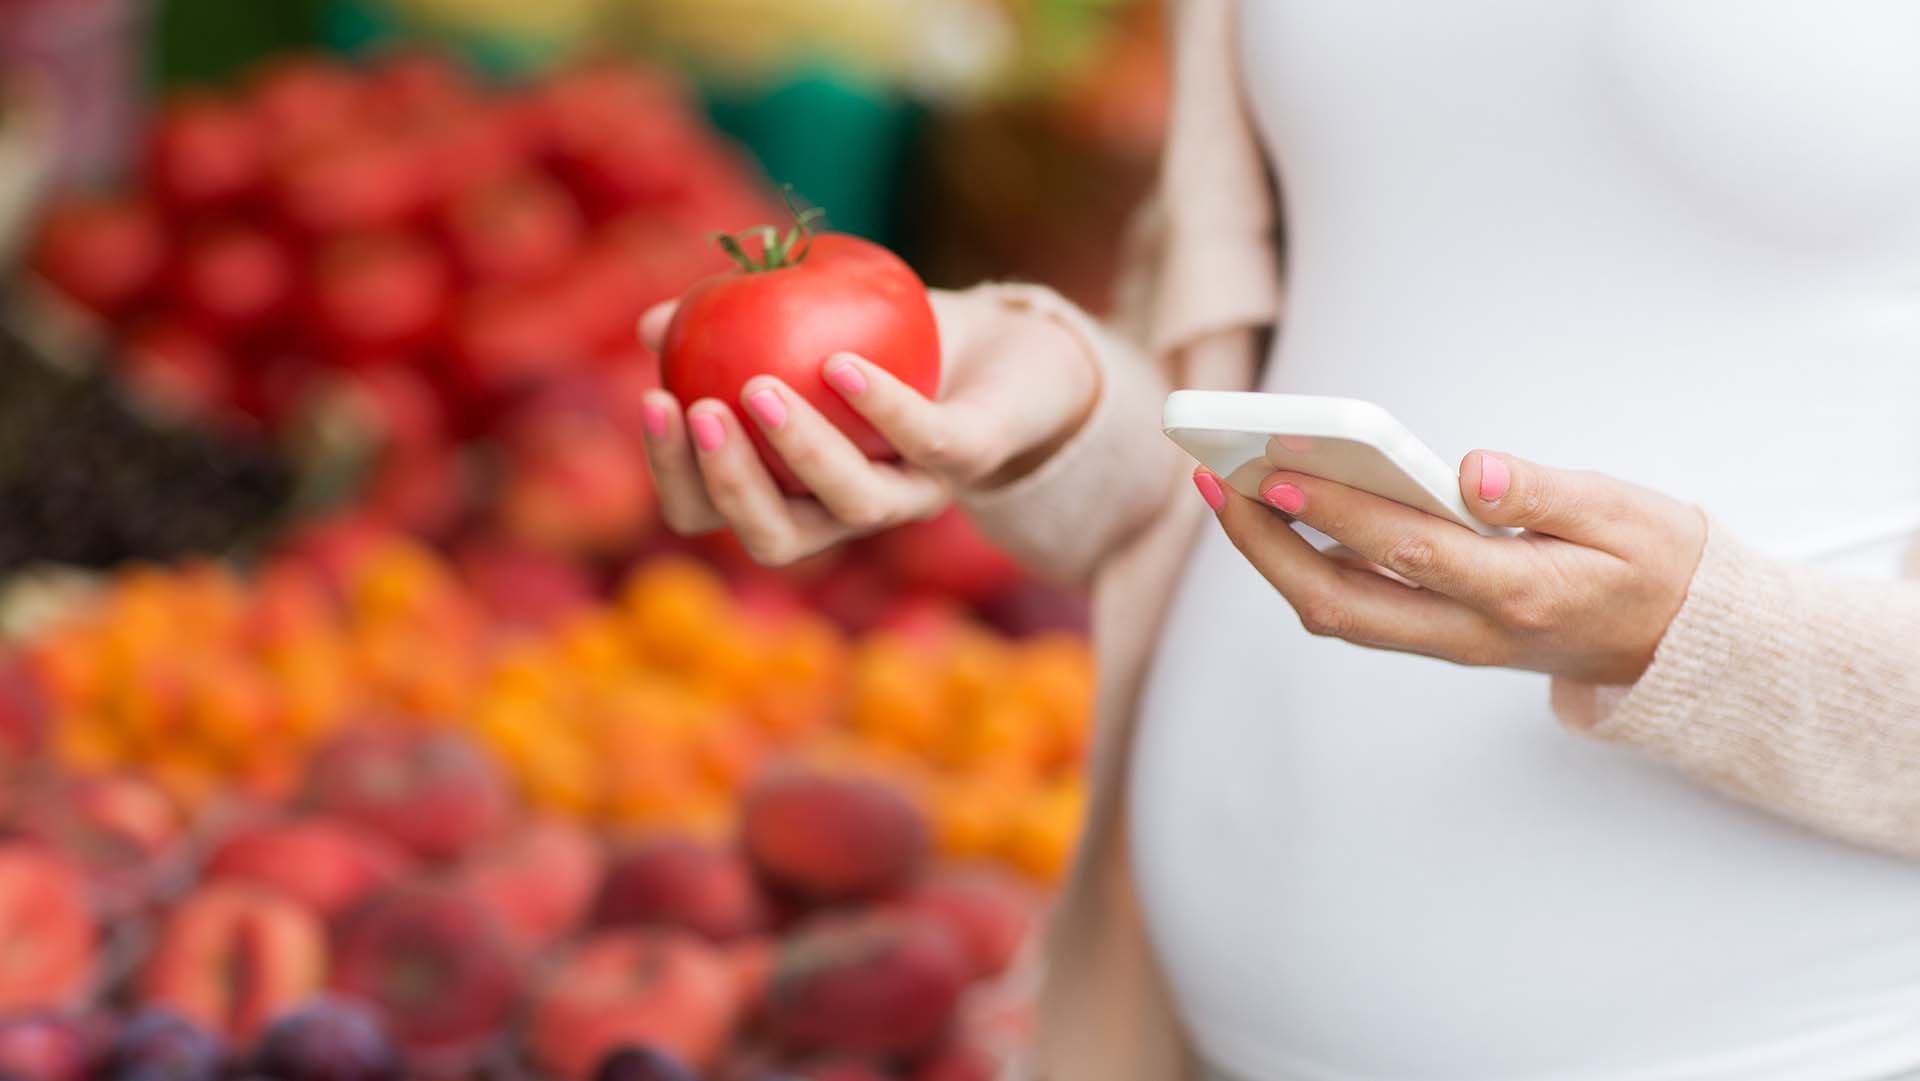 sale, shopping, food, pregnancy and people concept - close up of pregnant woman with smartphone and tomato choosing vegetables at street market